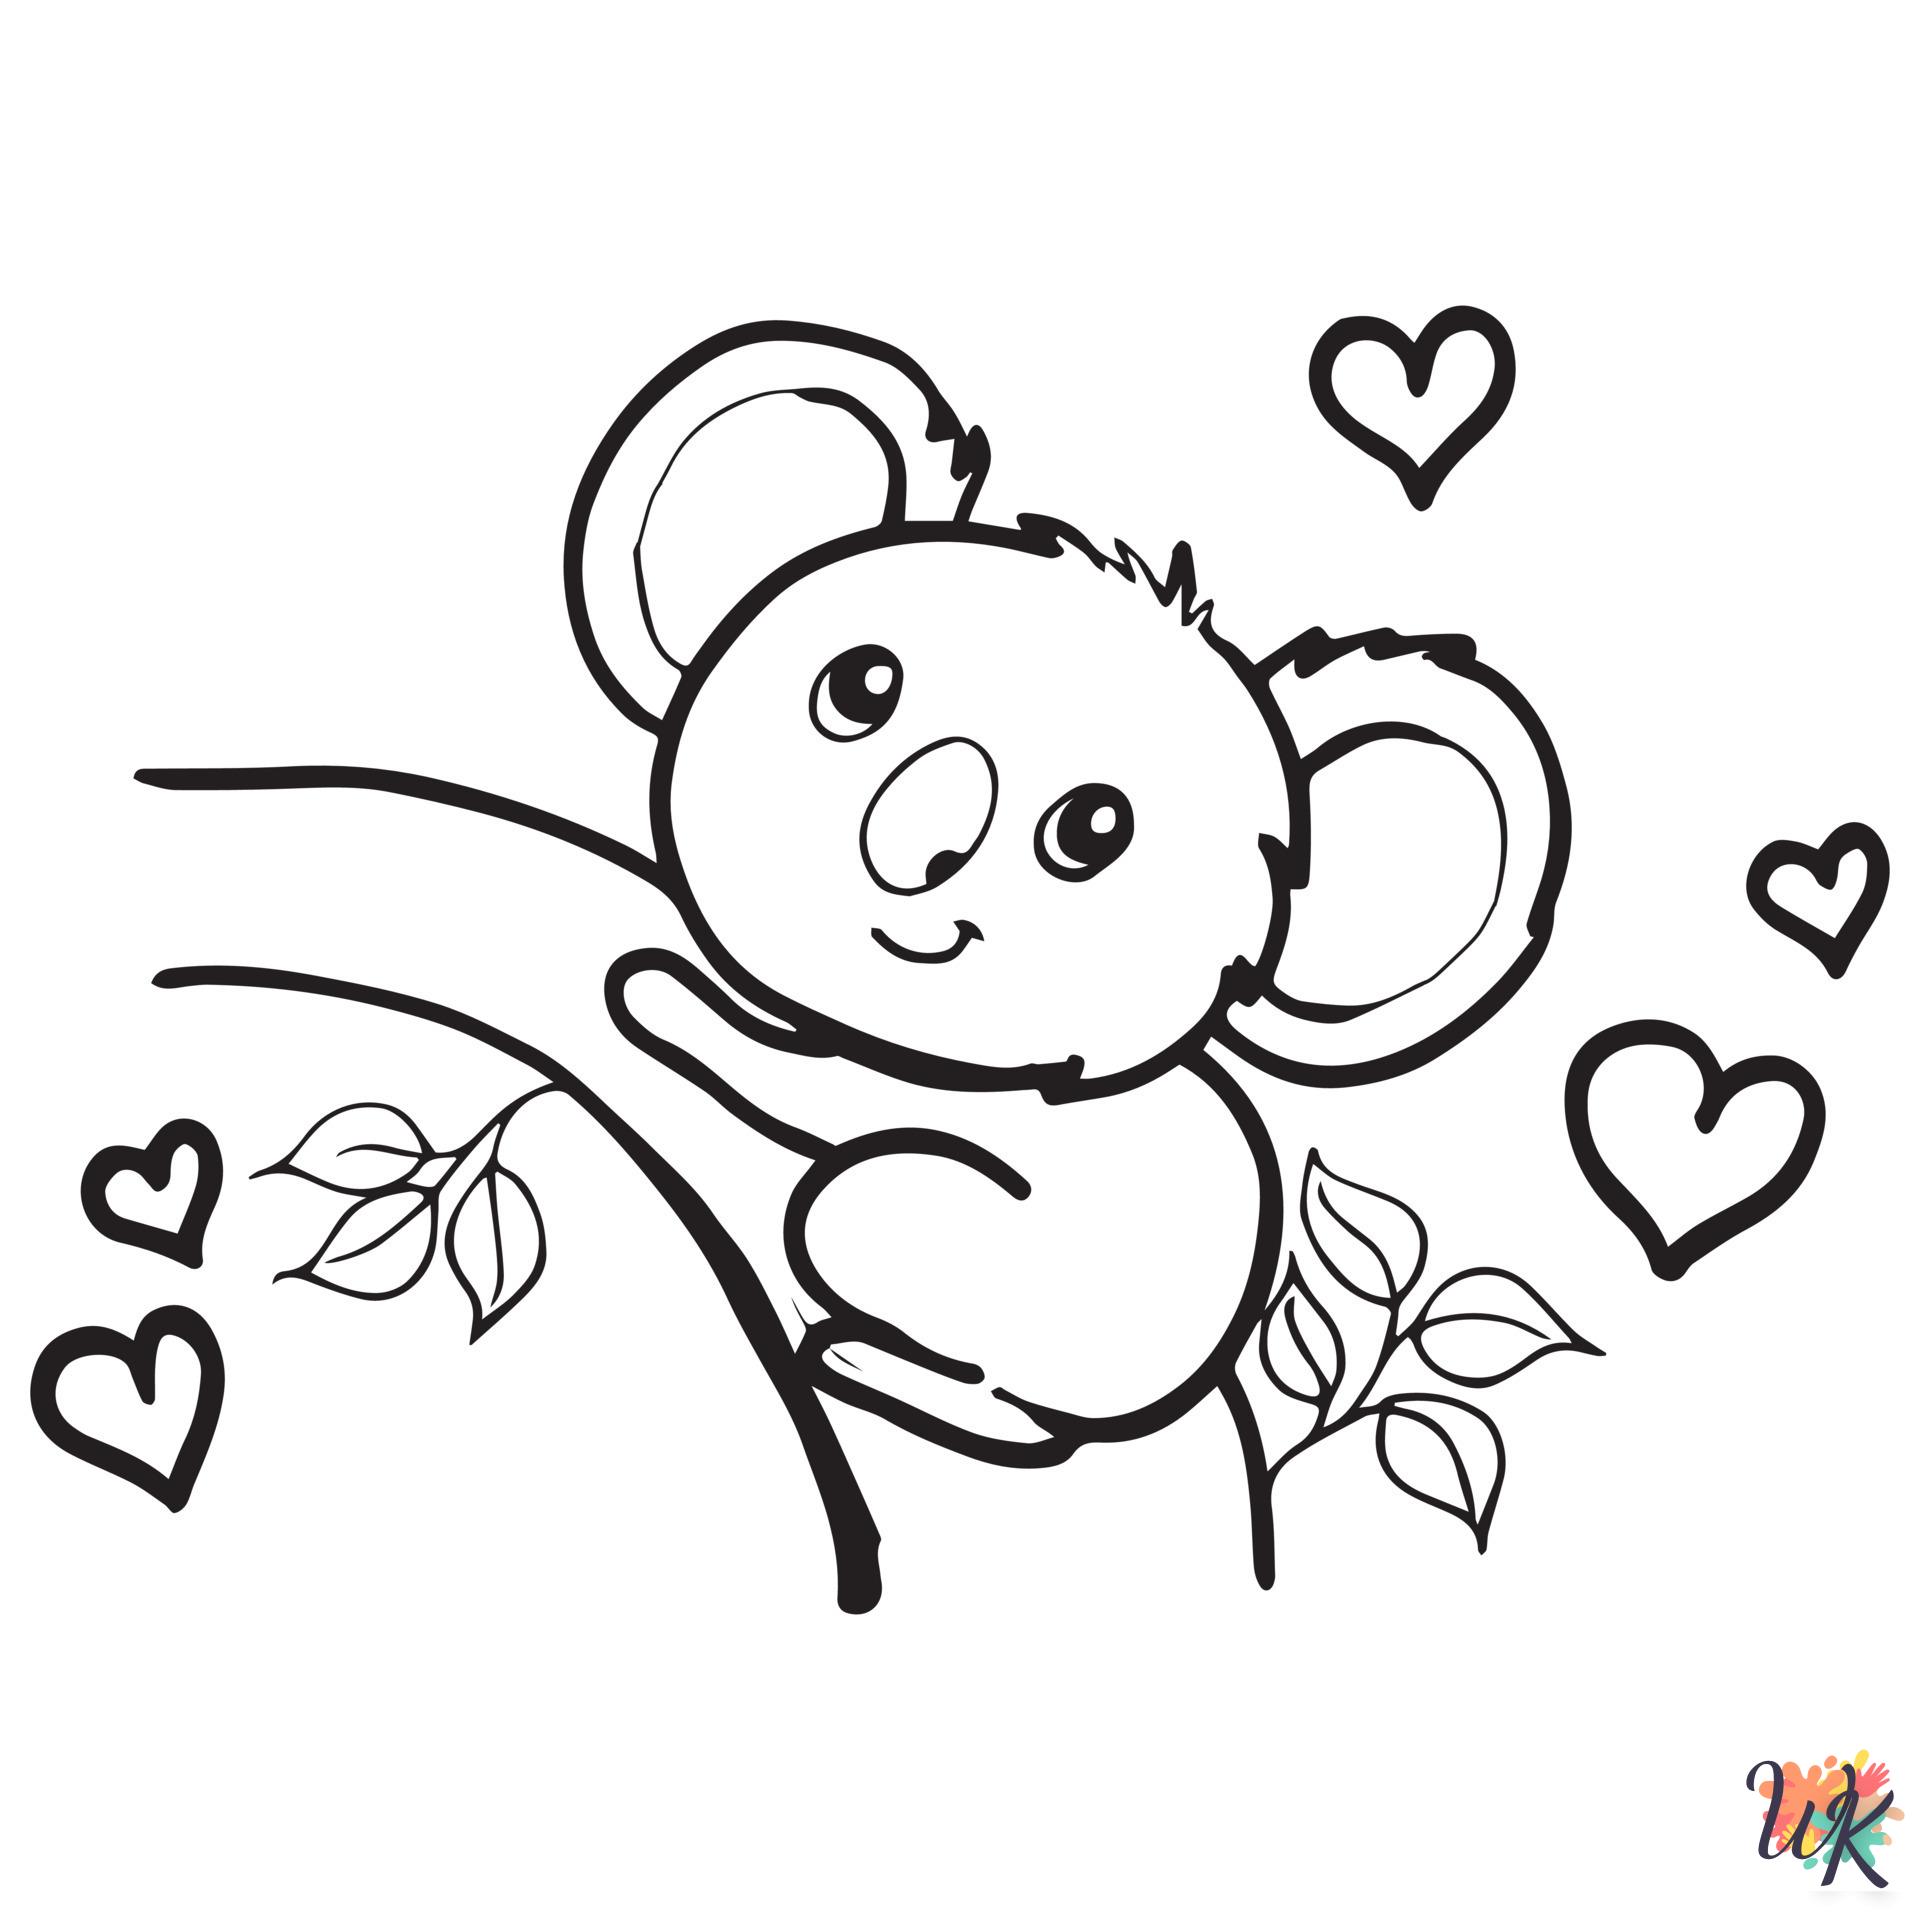 Koala coloring pages for adults easy